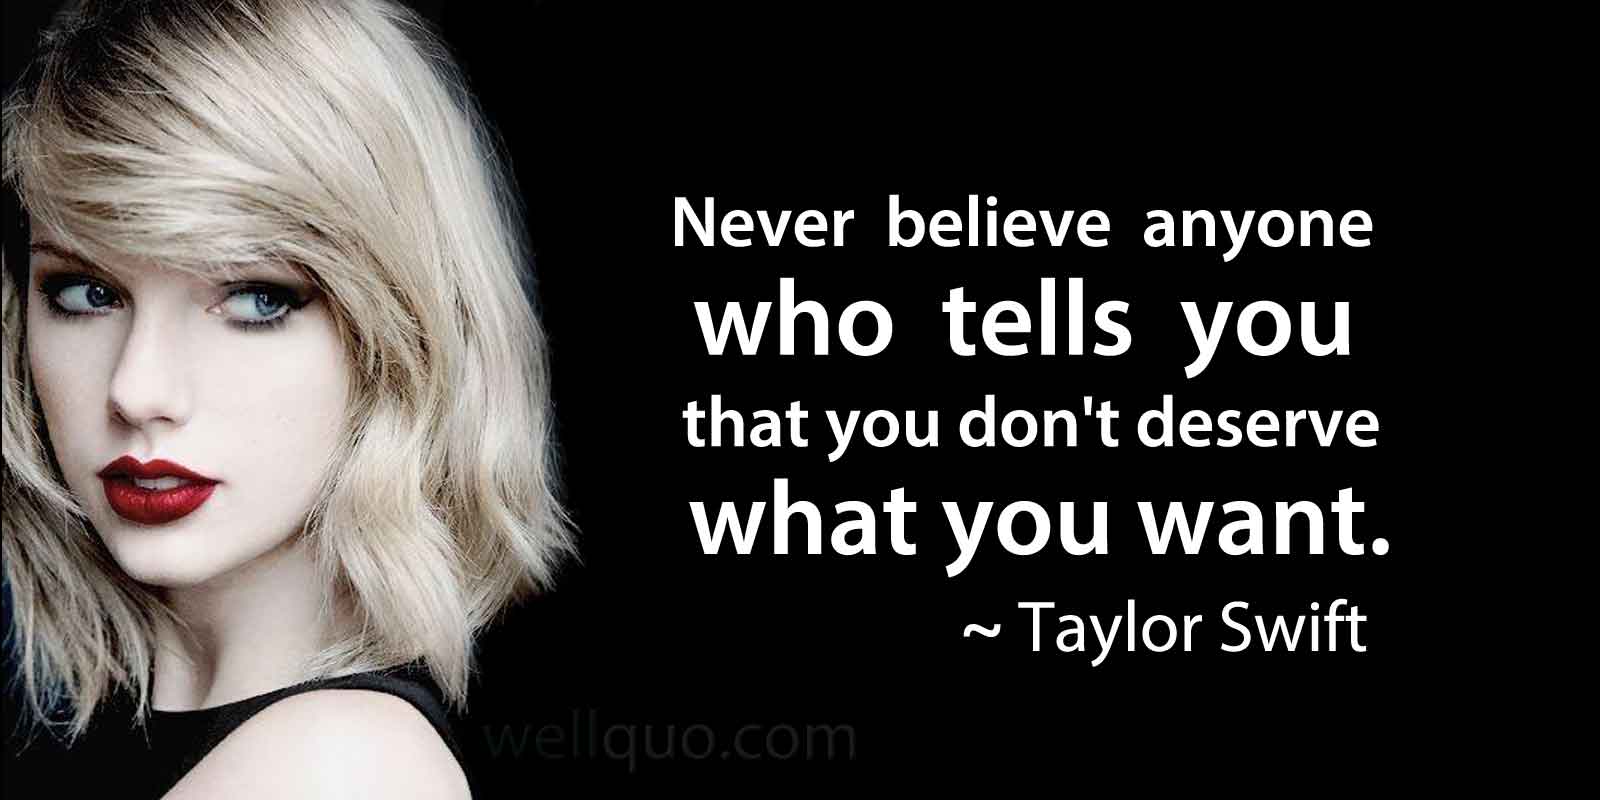 Inspirational Taylor Swift Quotes - Well Quo